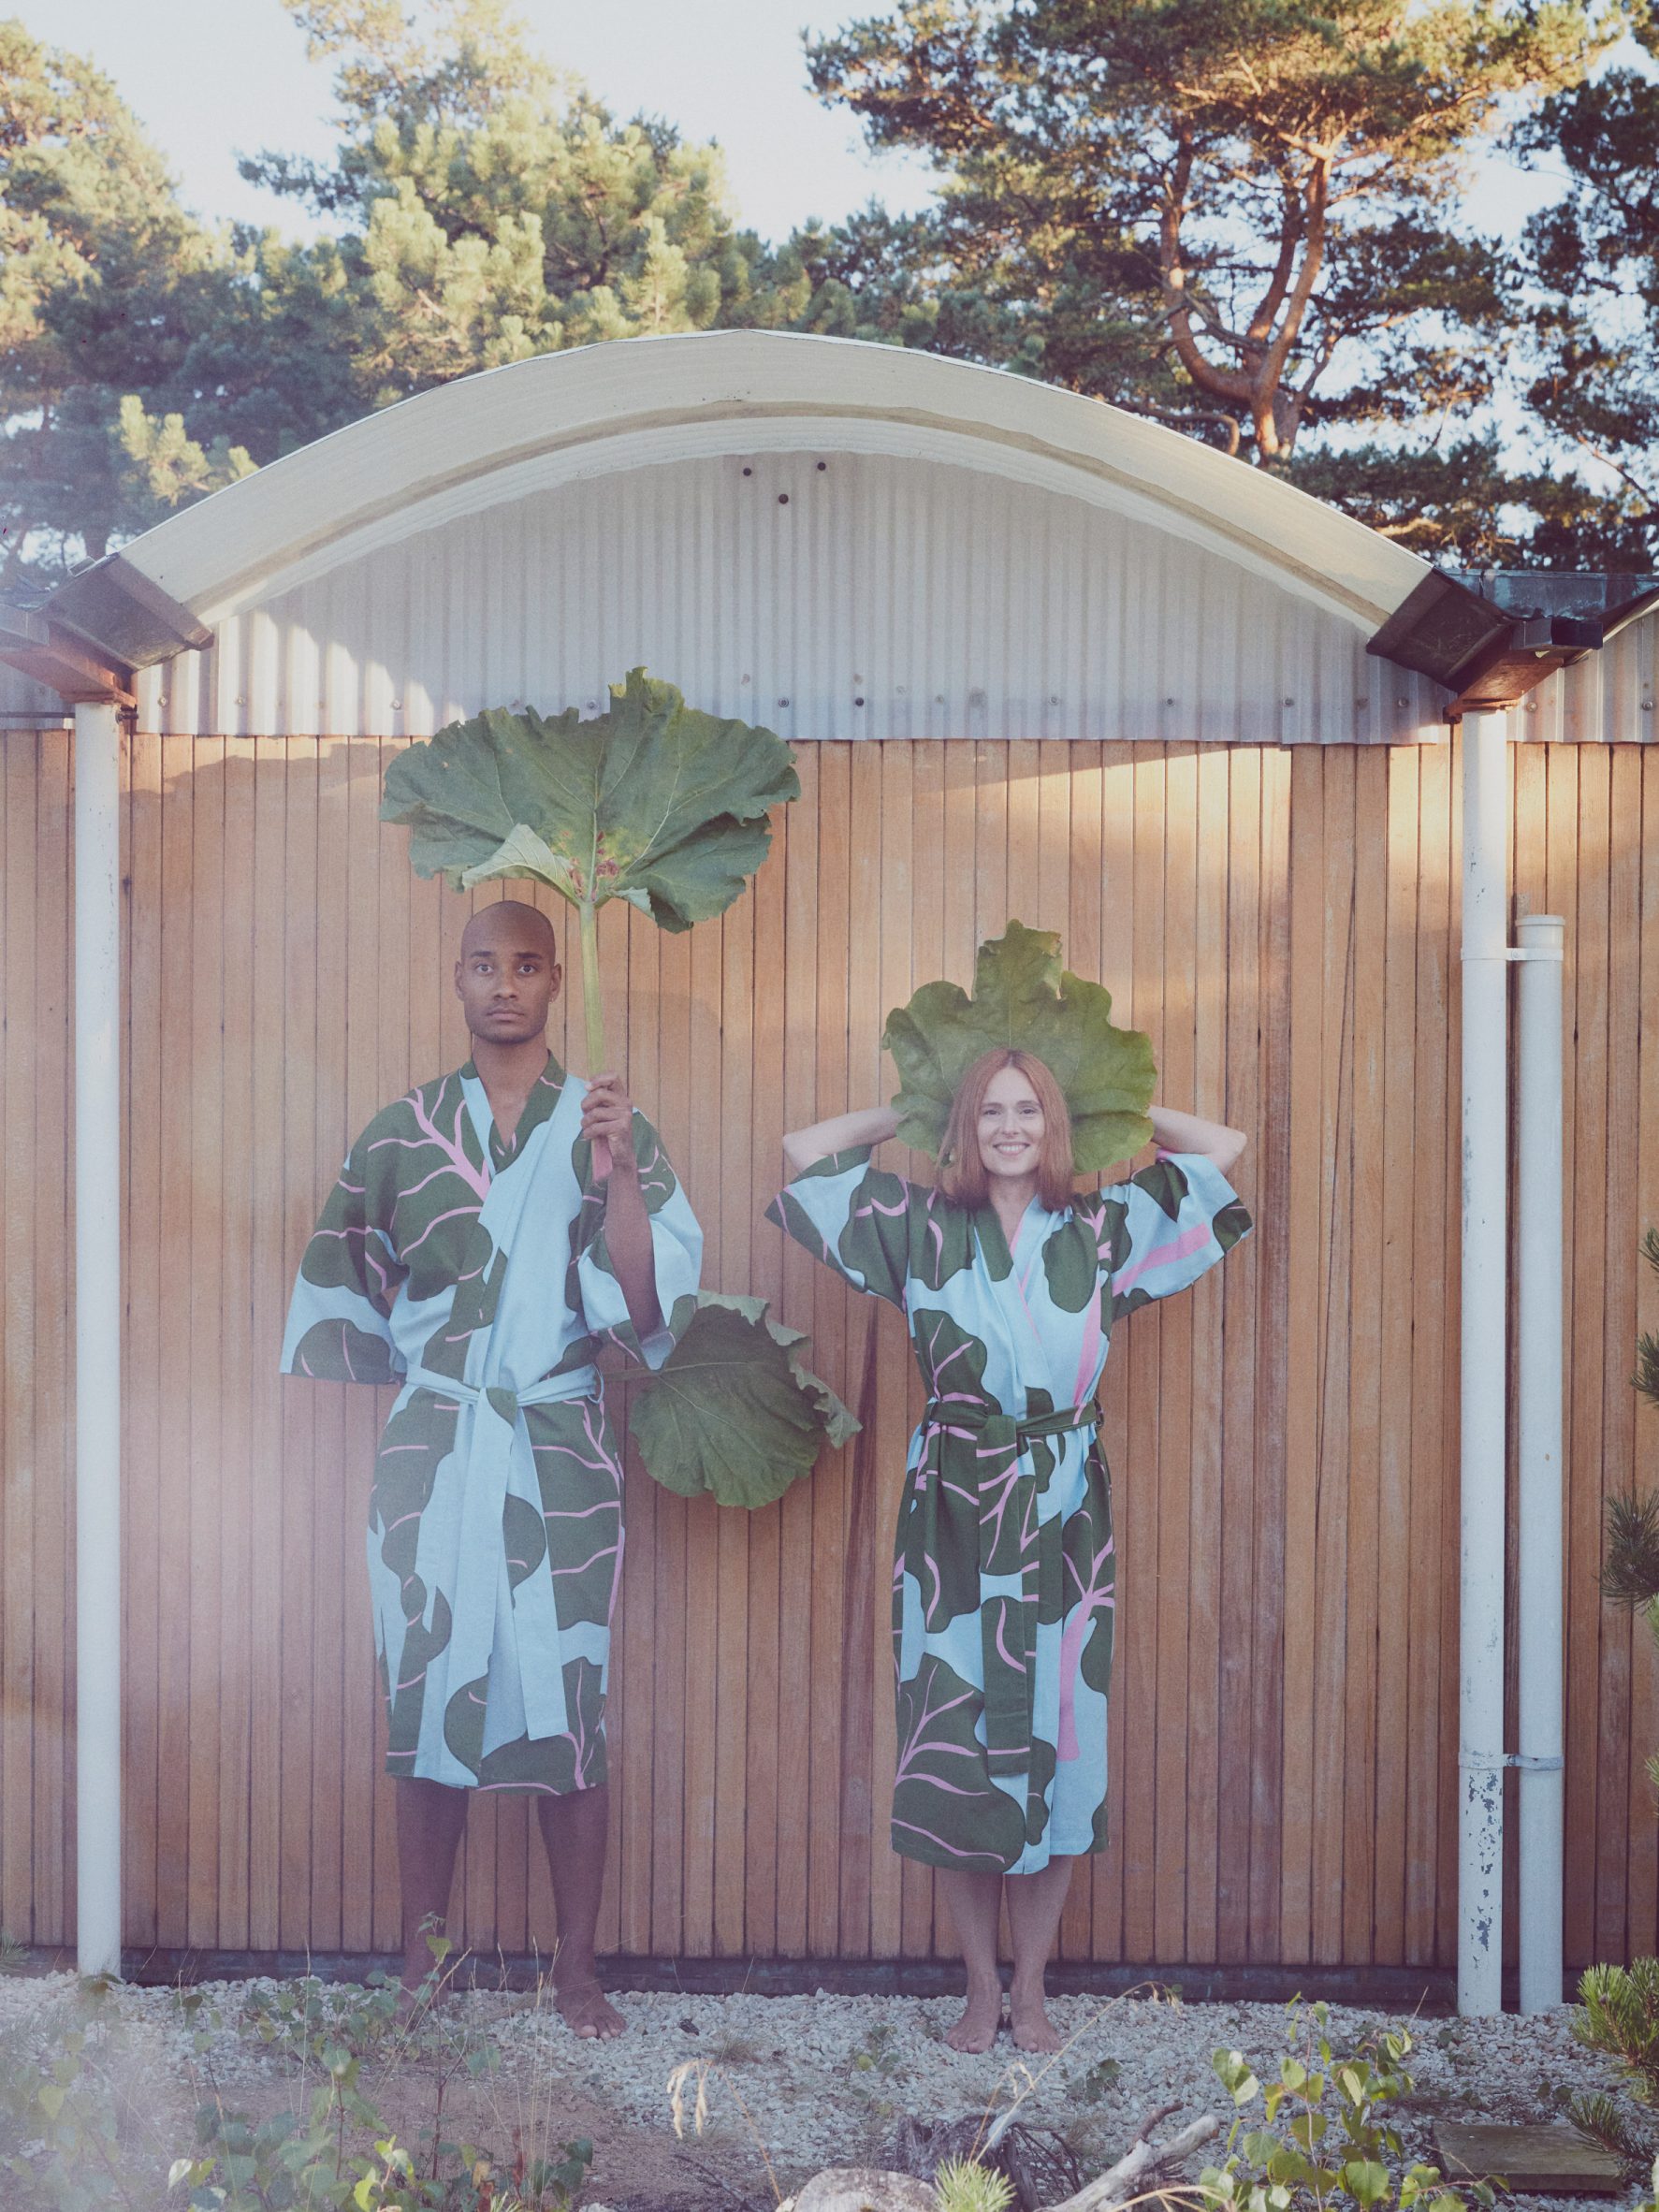 Two people wearing blue and green printed bathrobes holding up large leaves